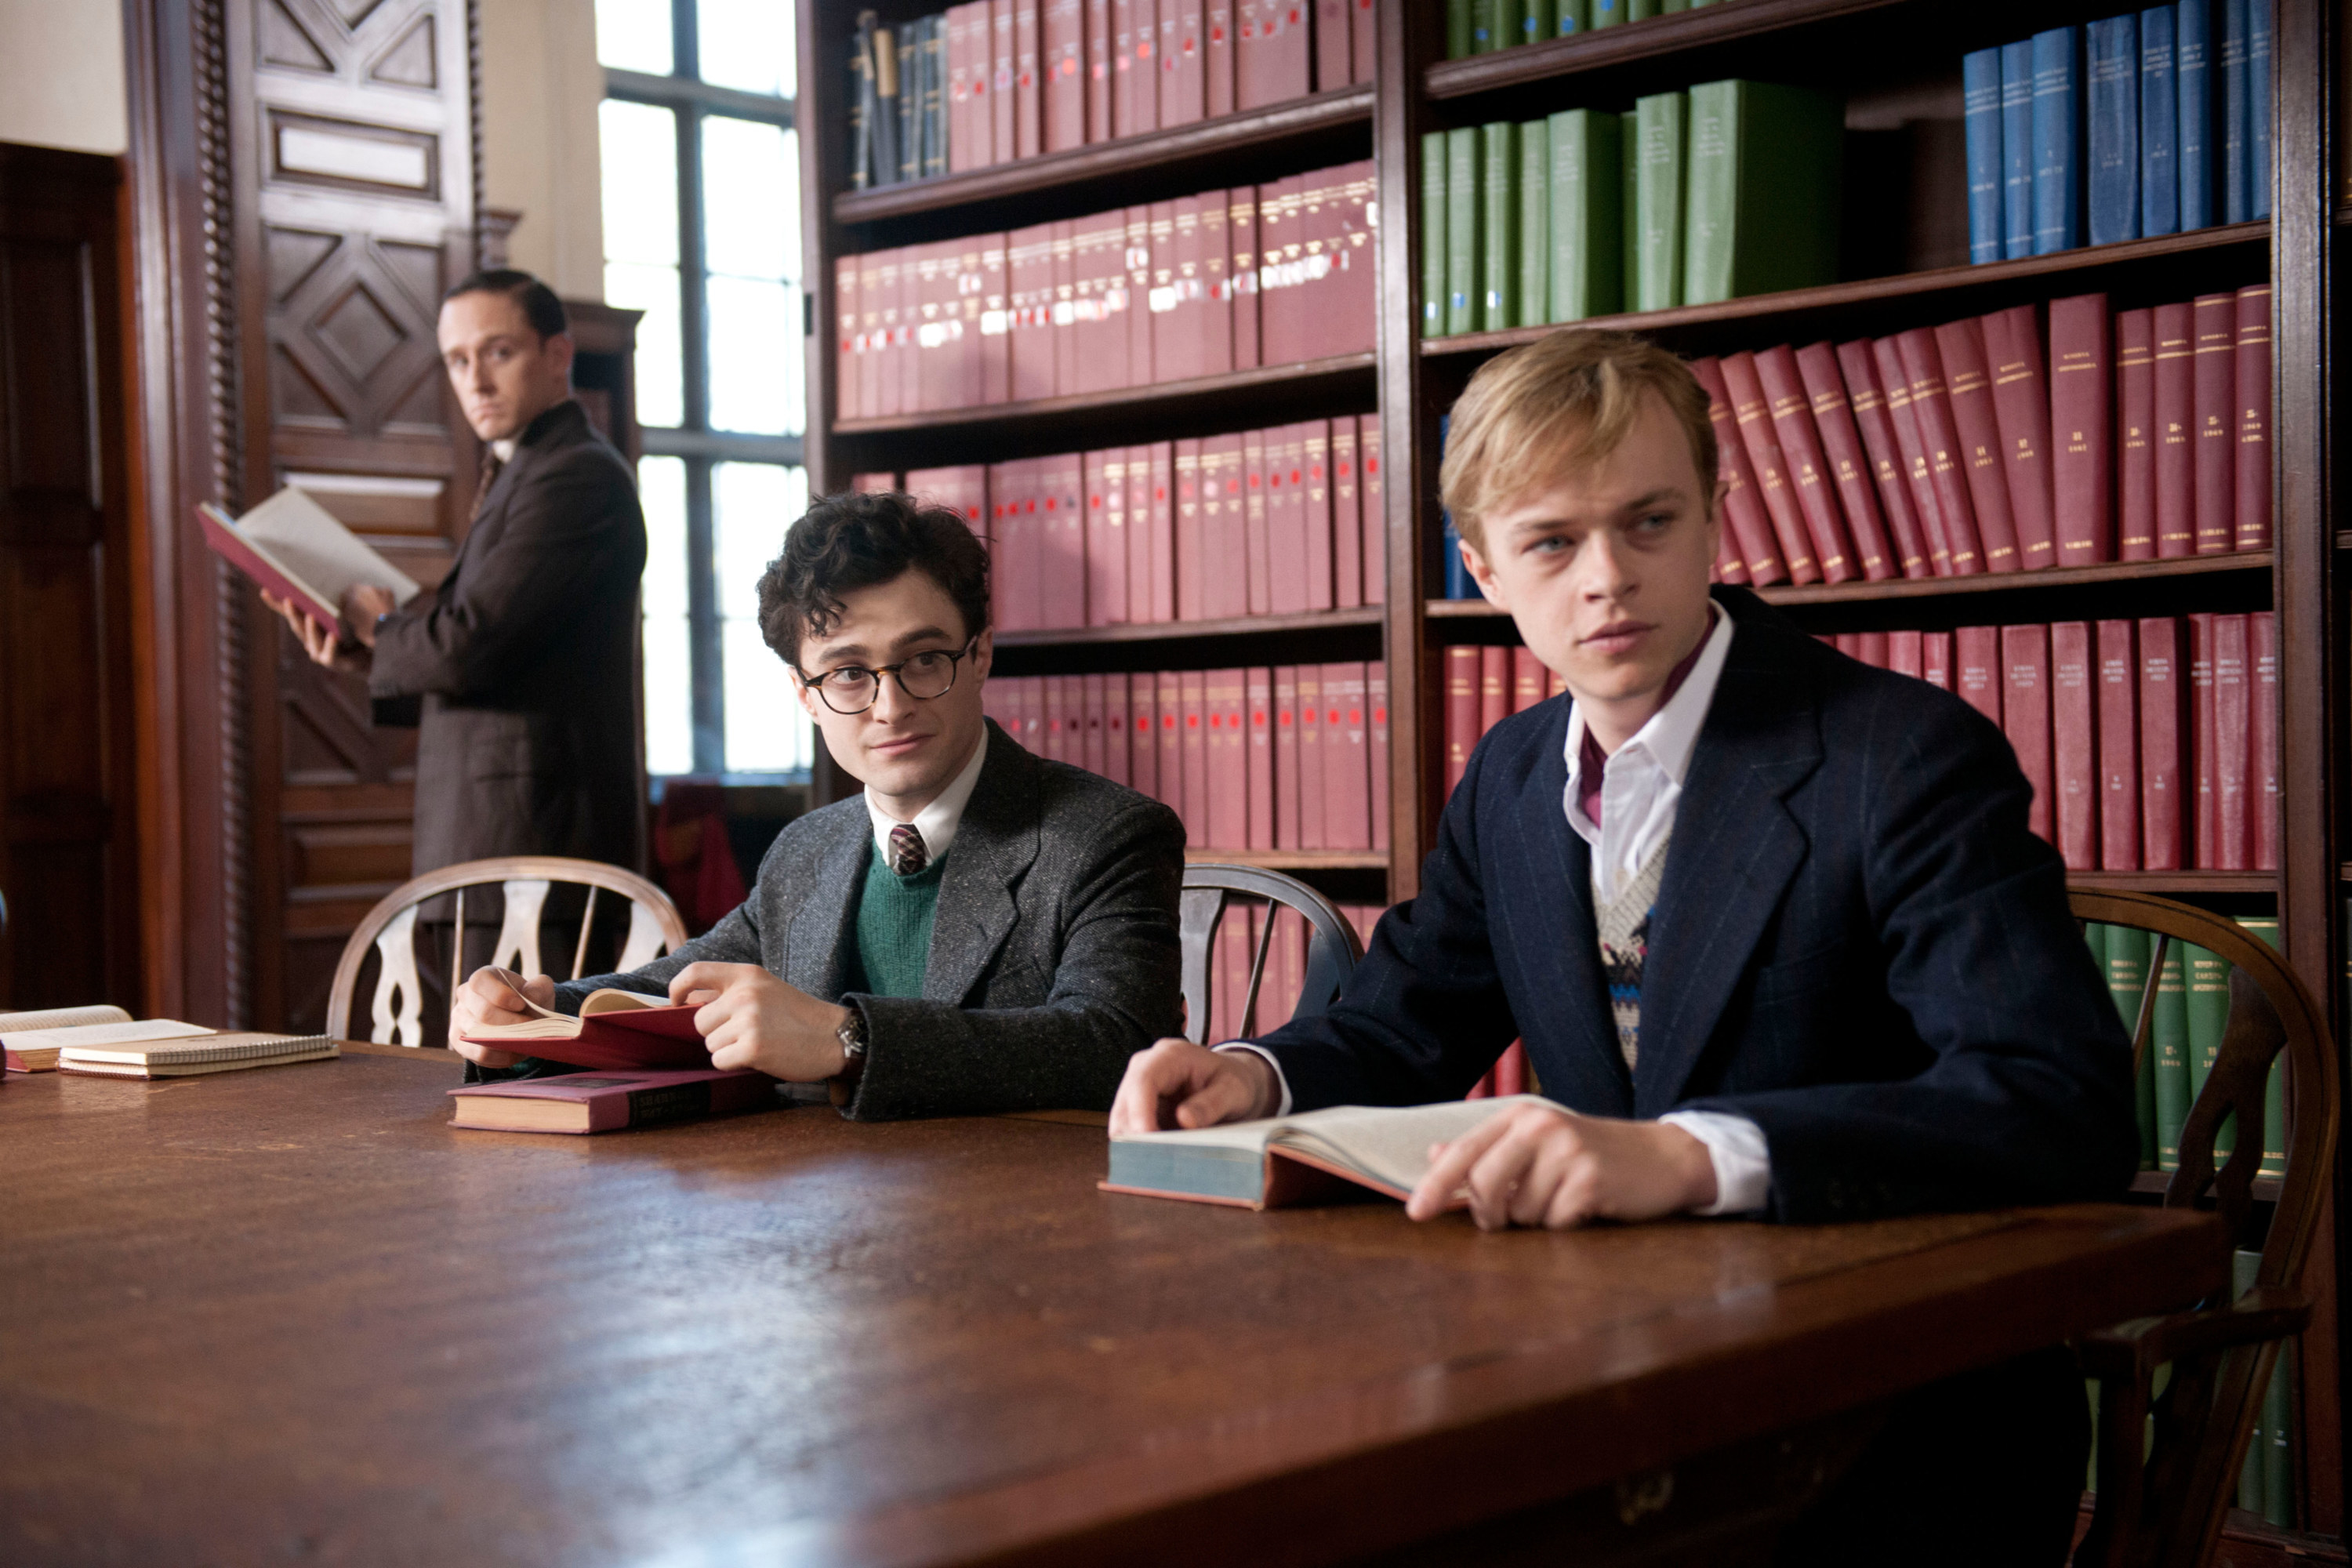 Daniel Radcliffe and Dane DeHaan sit at a table together